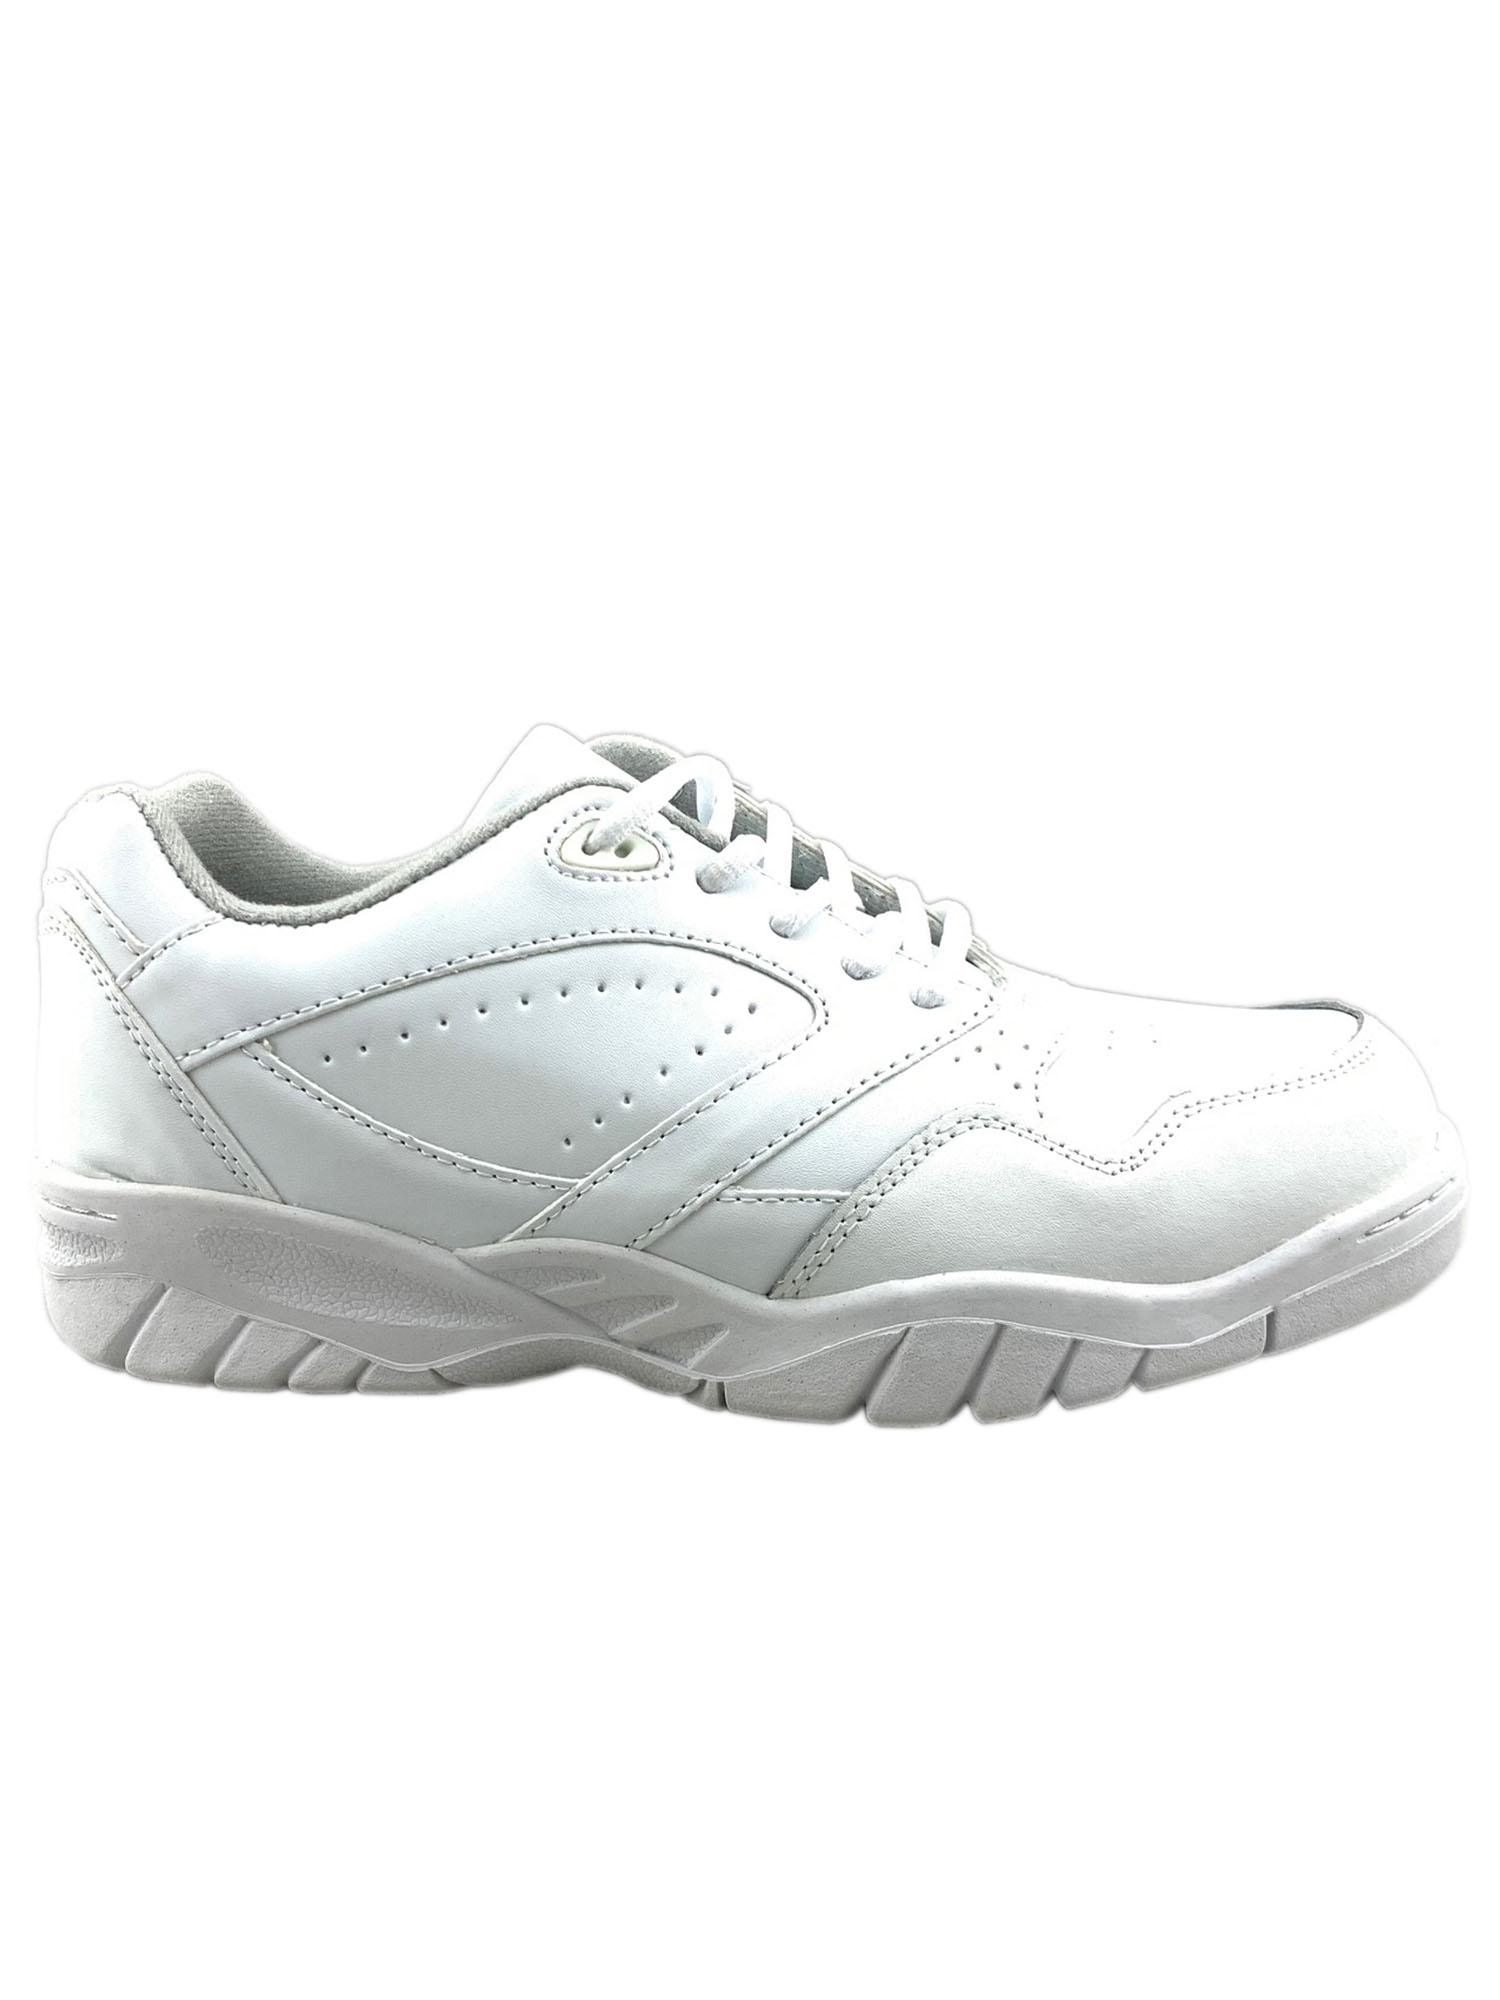 Tanleewa Men's Leather White Sports Shoes Lightweight Sneakers Breathable Casual Shoe Size 14 - image 1 of 5